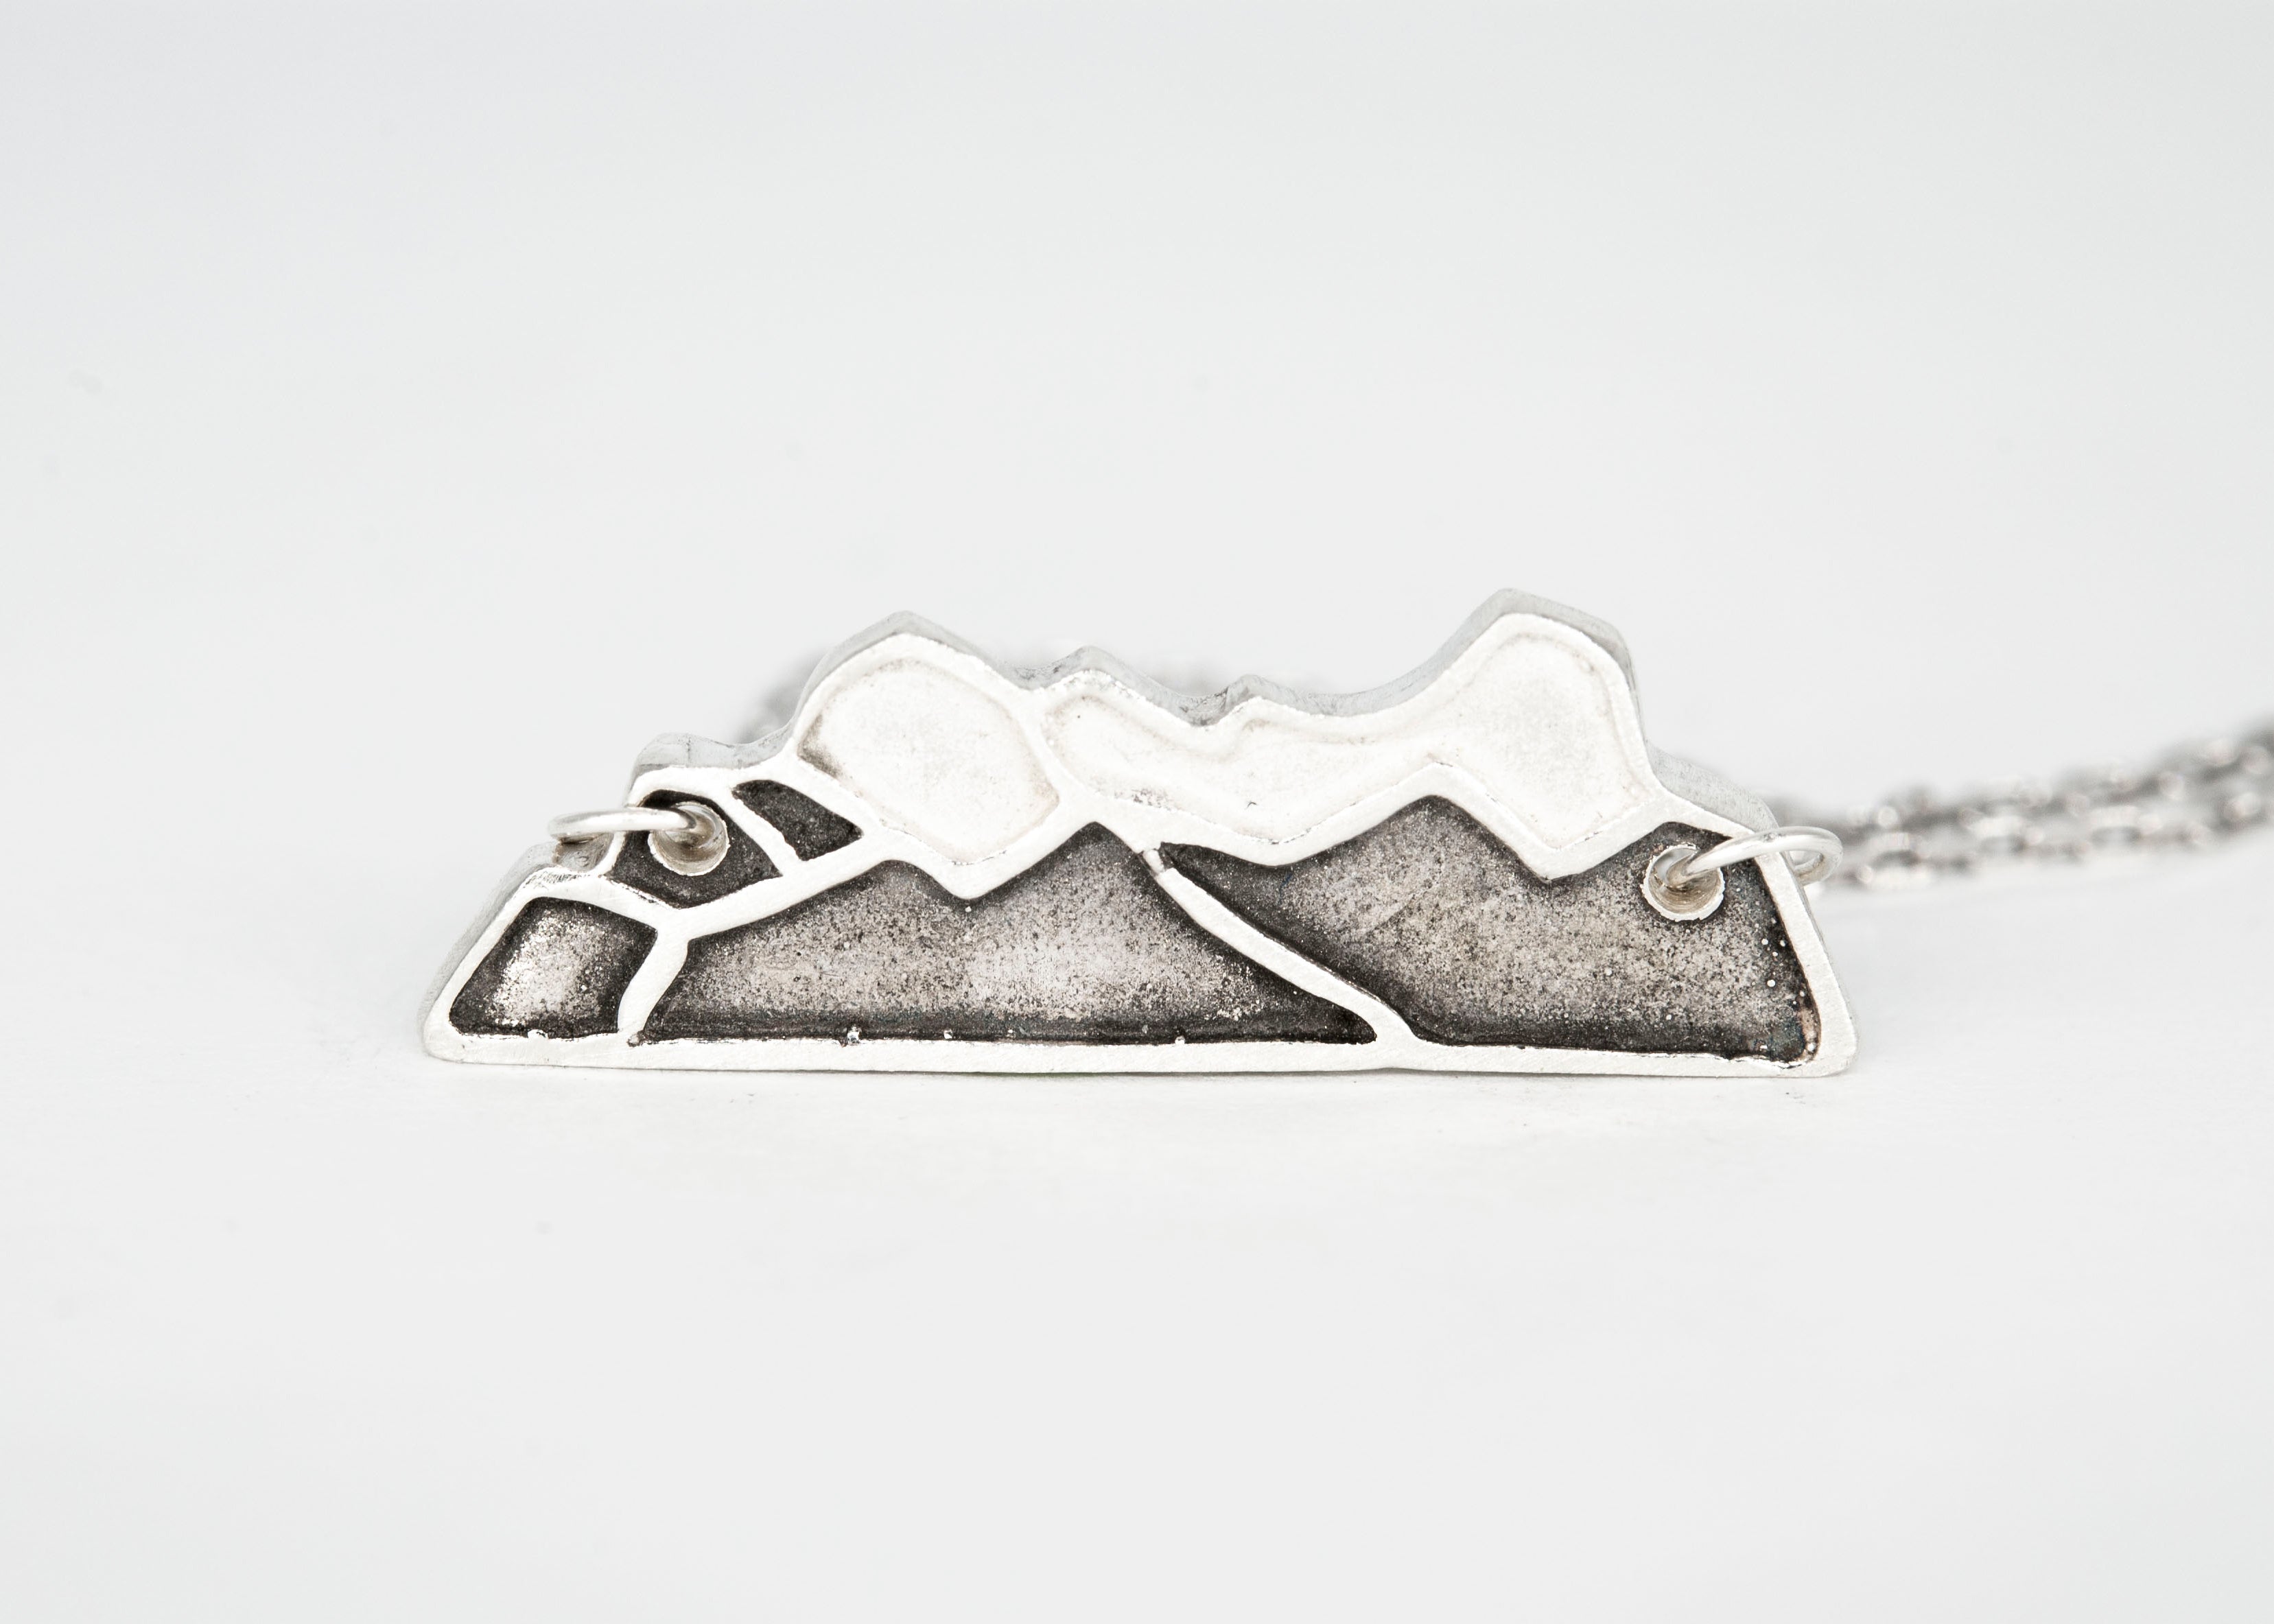 Mount Lawrence Grassi Necklace